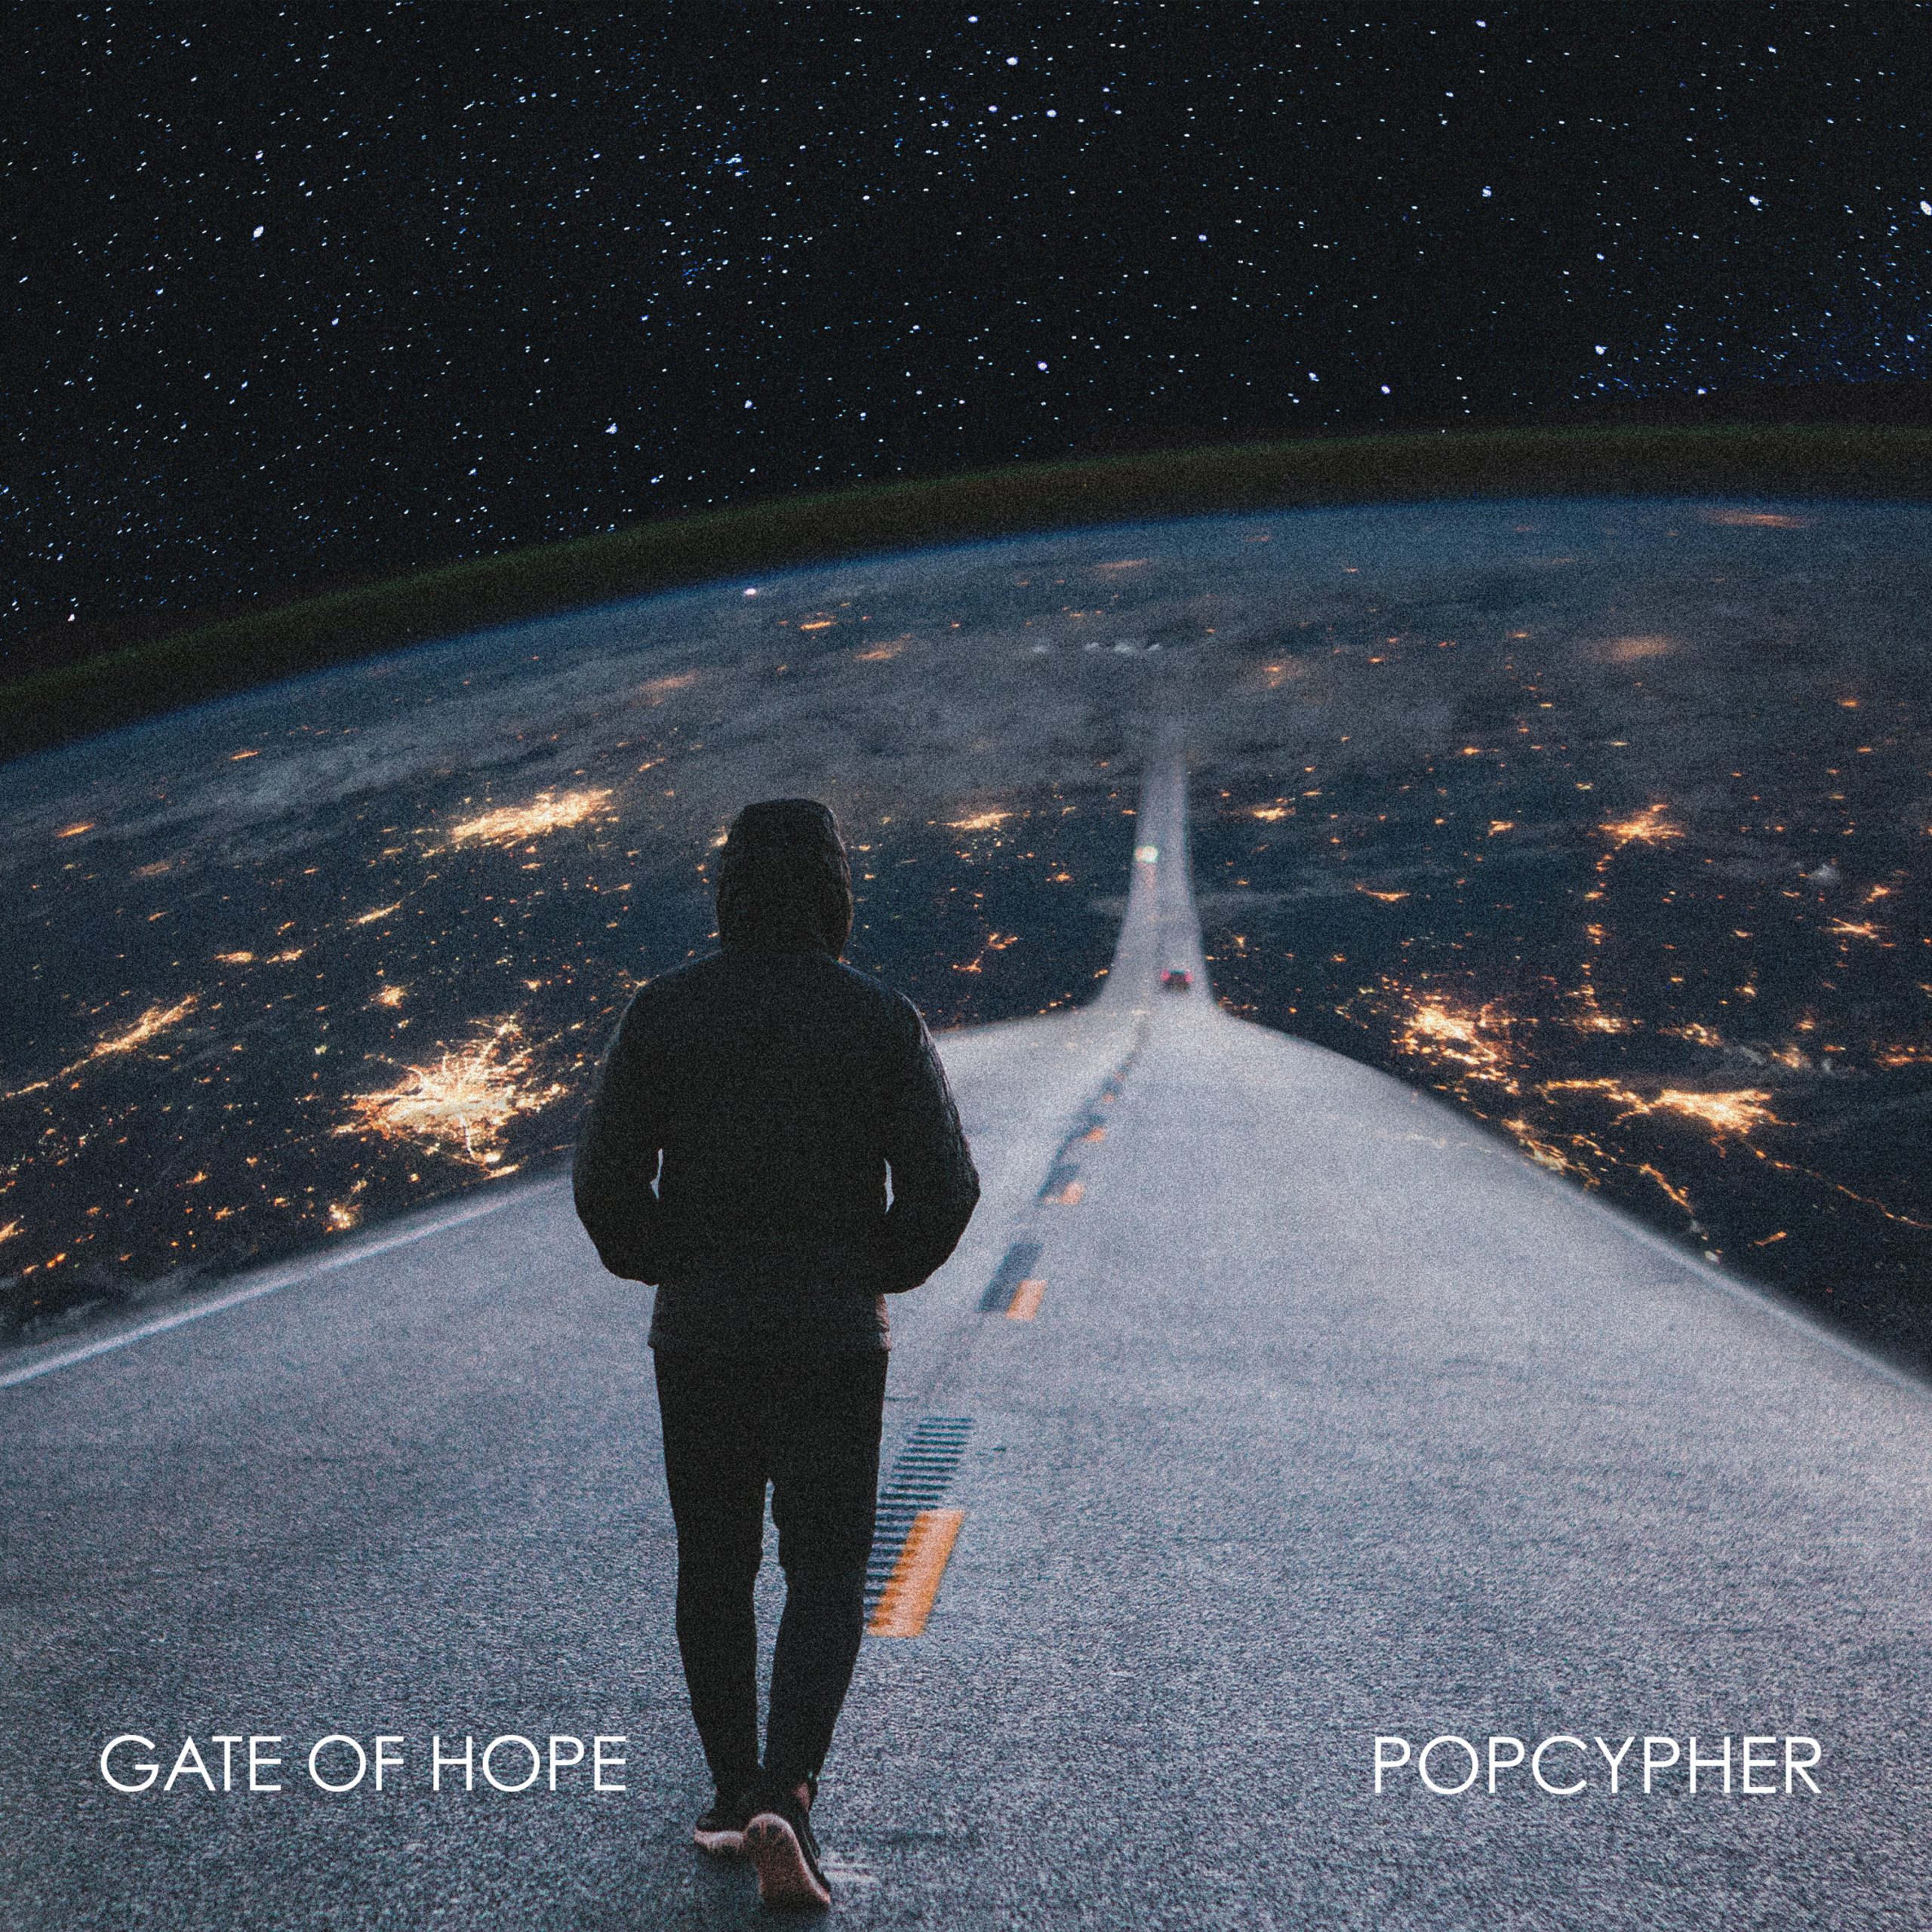 New single ‘Gate of Hope’ from ‘Popcypher’ features dreamy synths and euphoric female vocals.